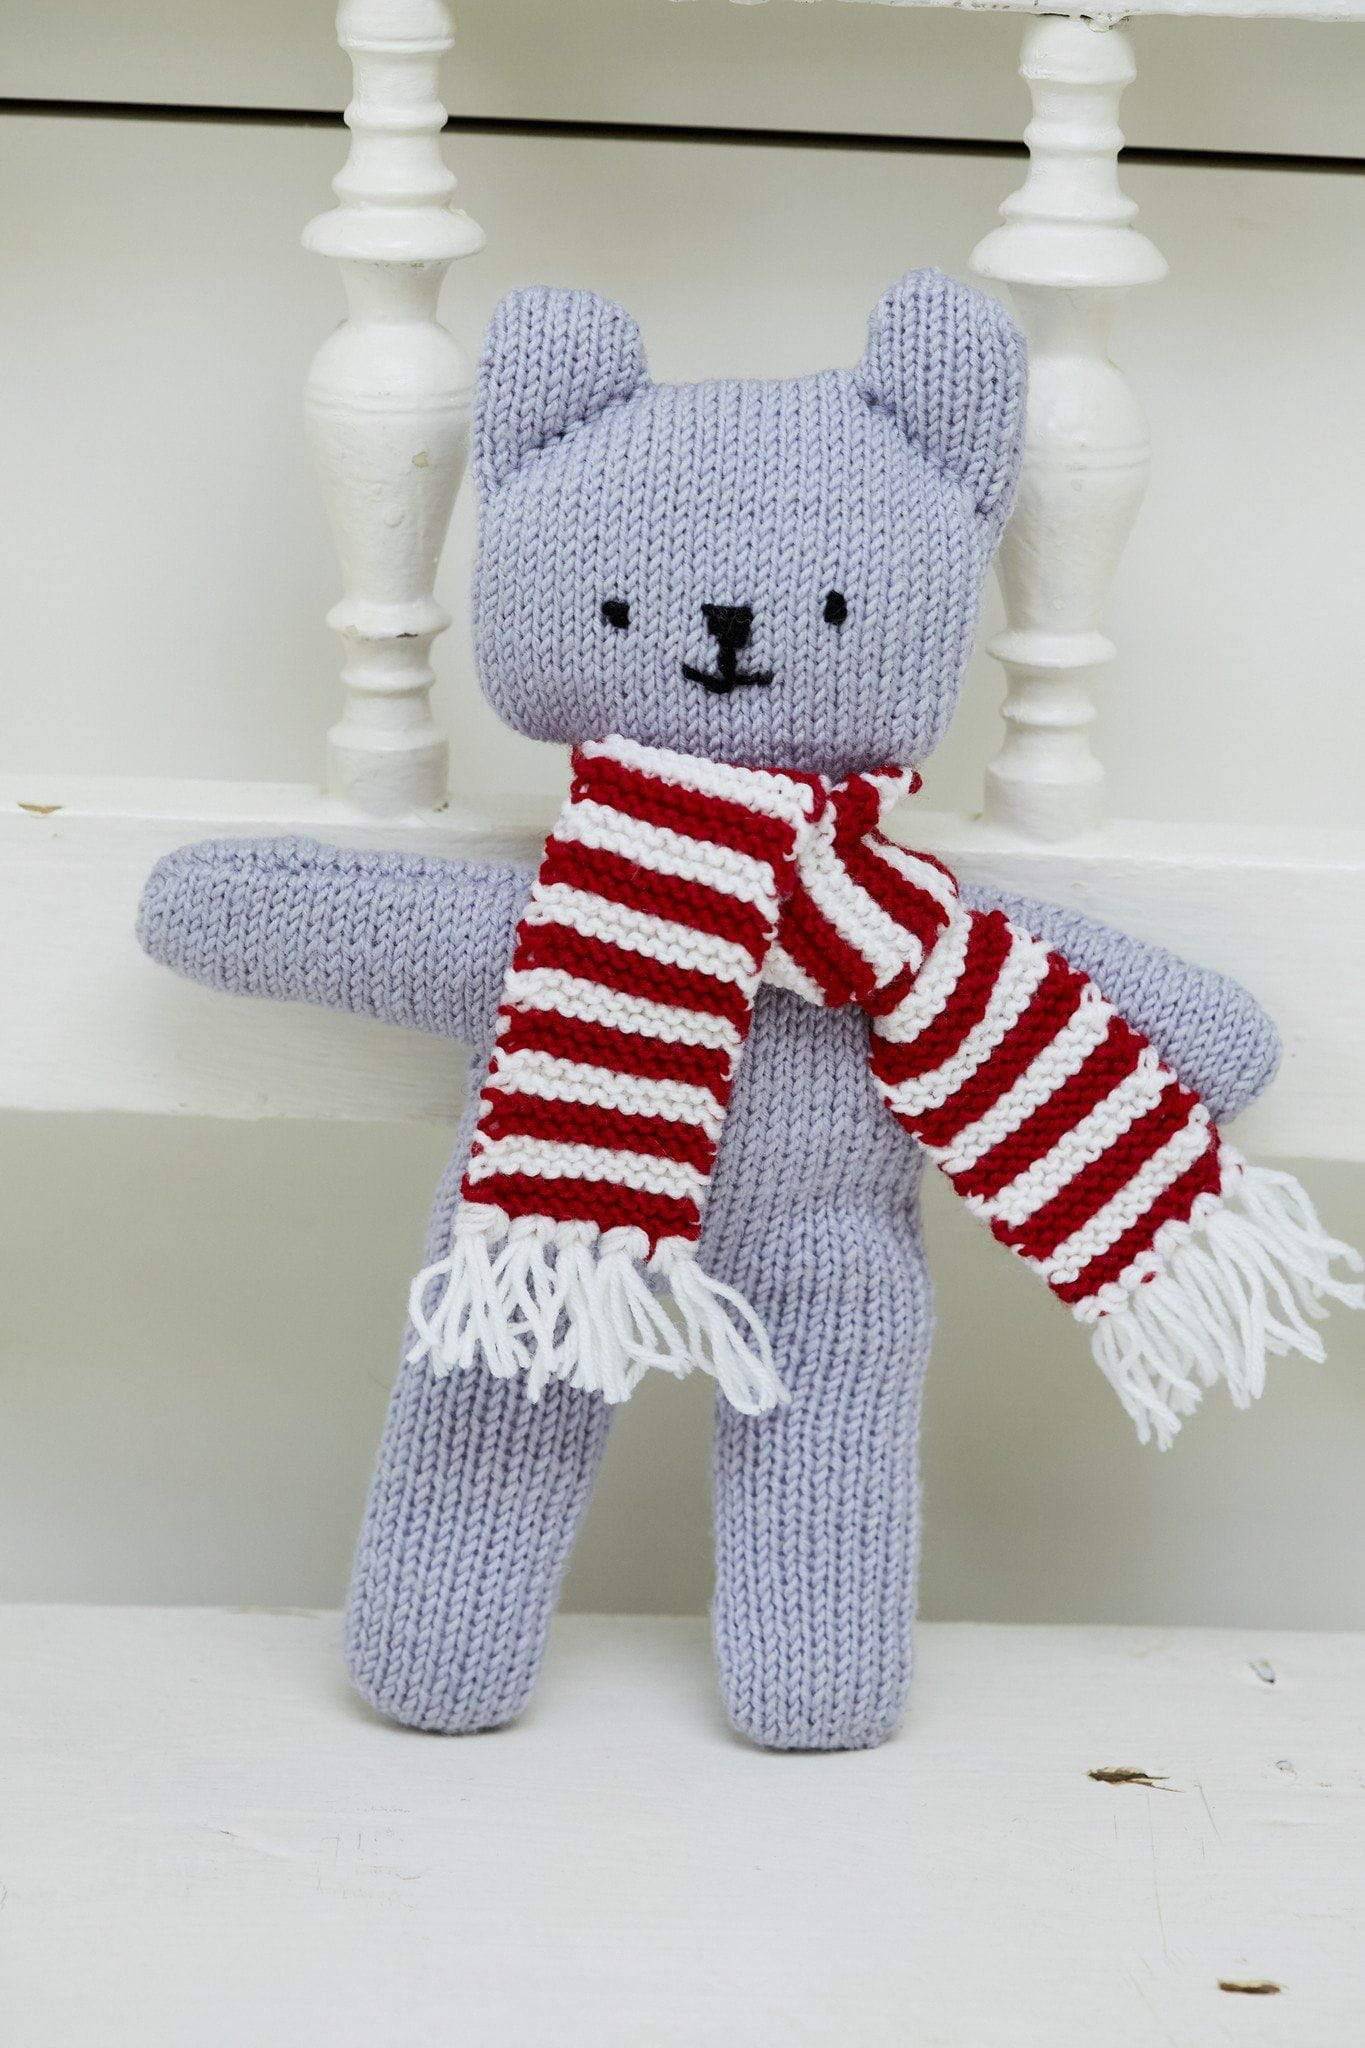 Simple Teddy Knitting Pattern | The Knitting Network